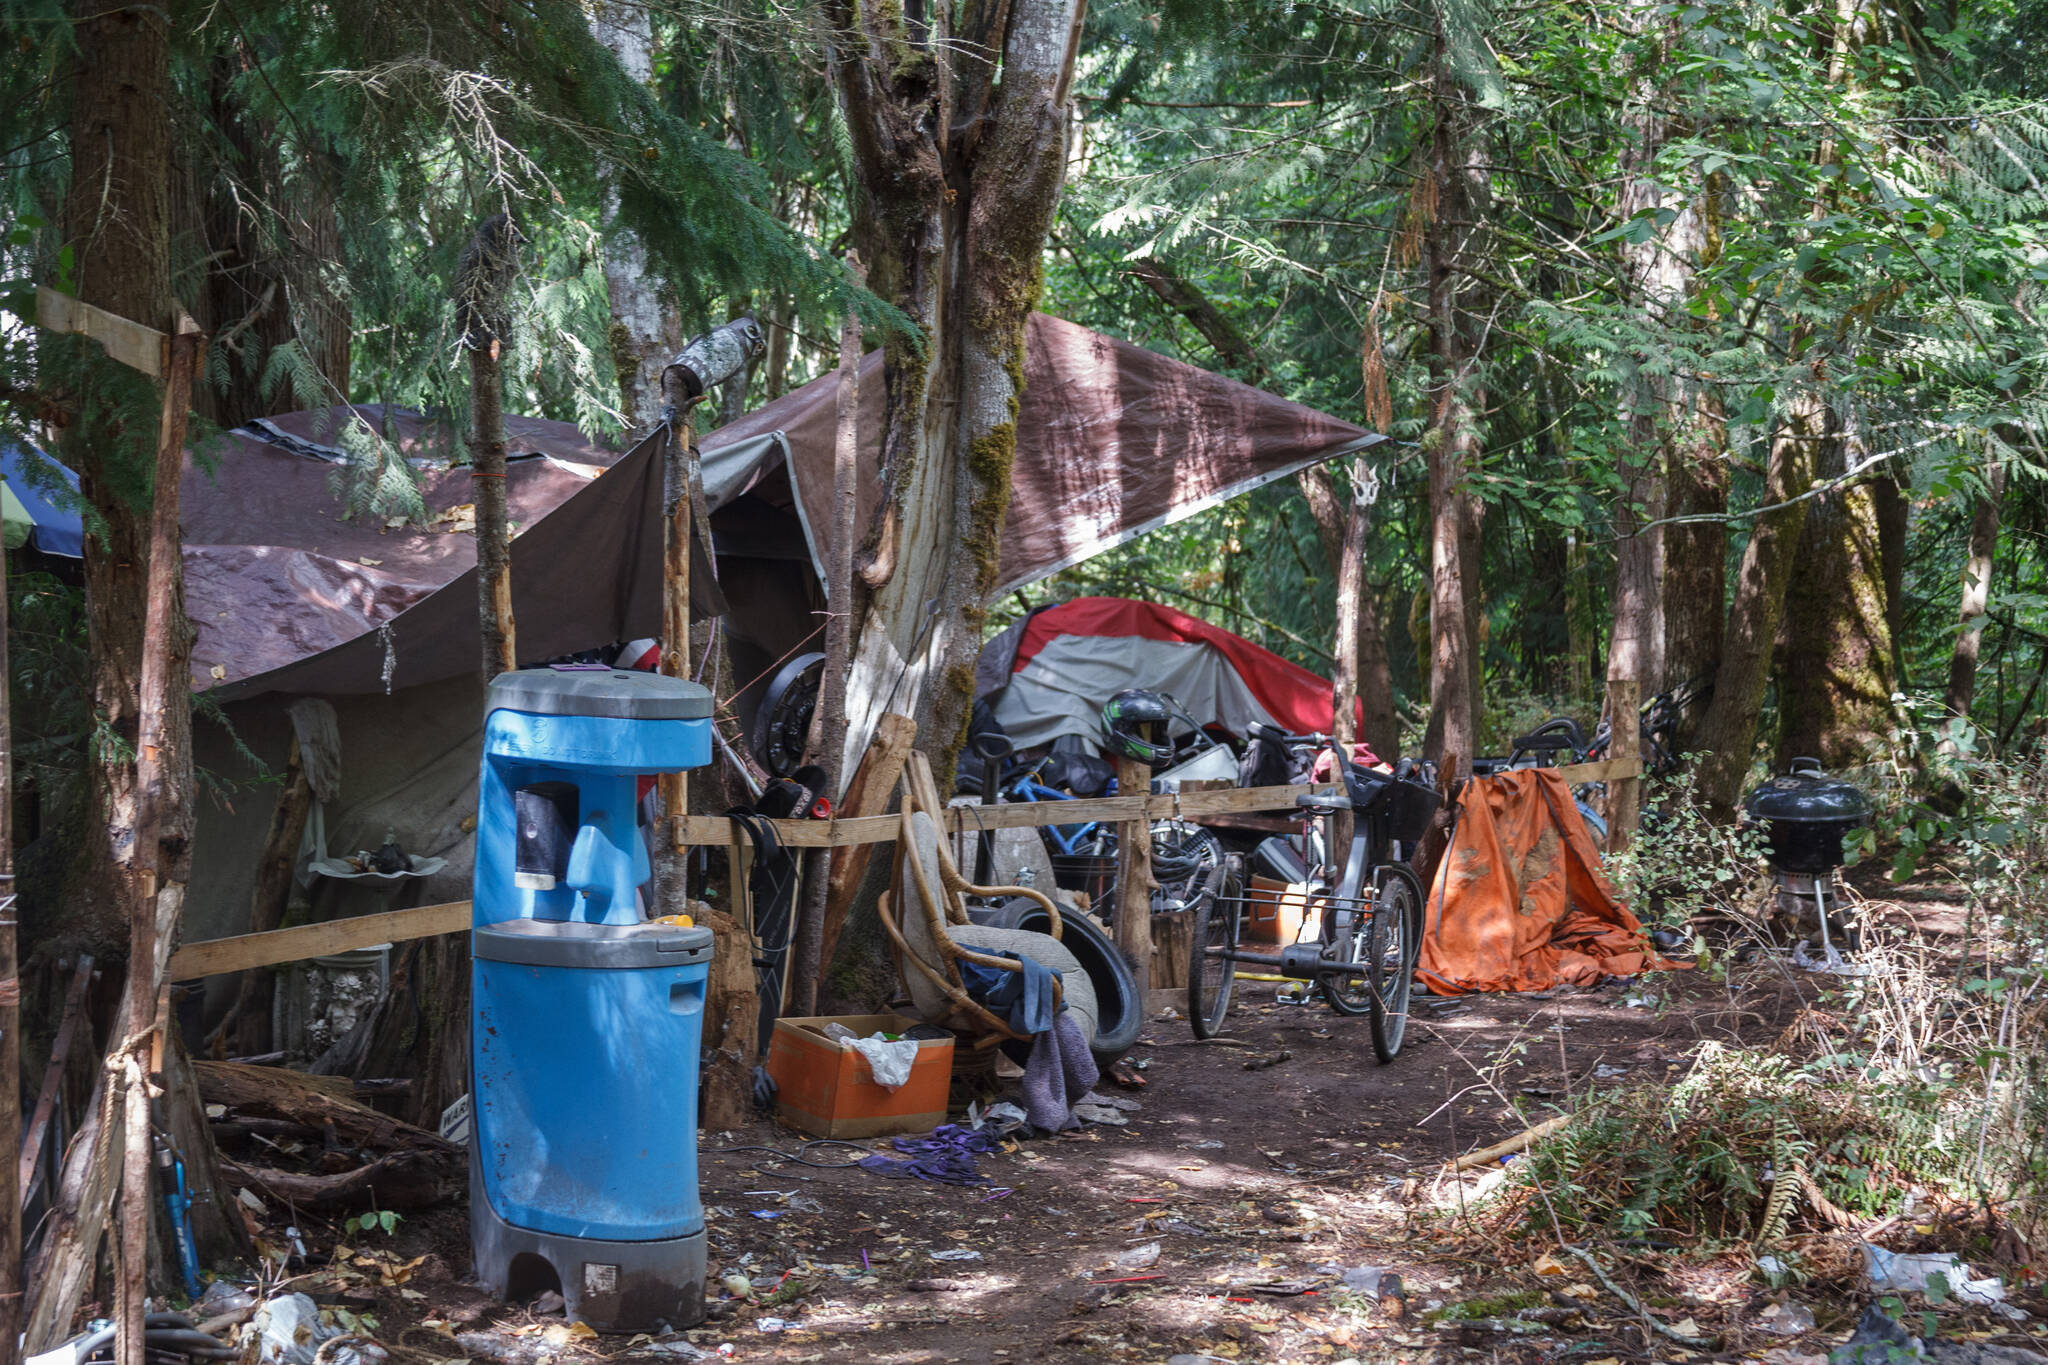 Homeless encampment in a wooded area in Auburn on Aug. 27, 2021. Photo by Henry Stewart-Wood/Sound Publishing